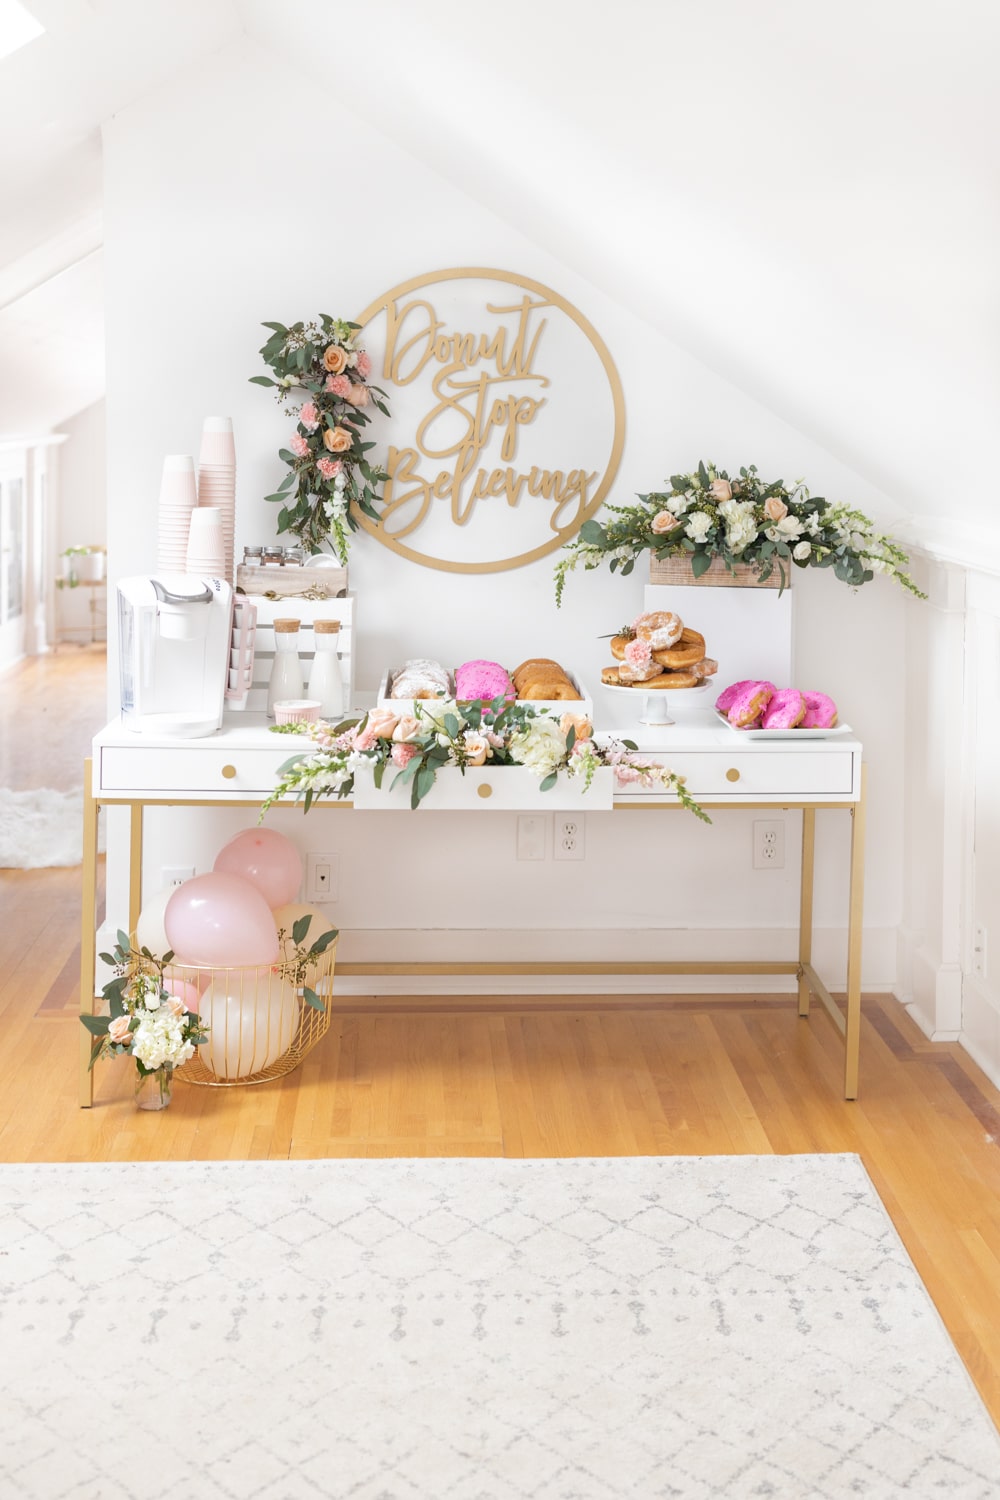 Graduation donut party styled by blogger Stephanie Ziajka on Diary of a Debutante